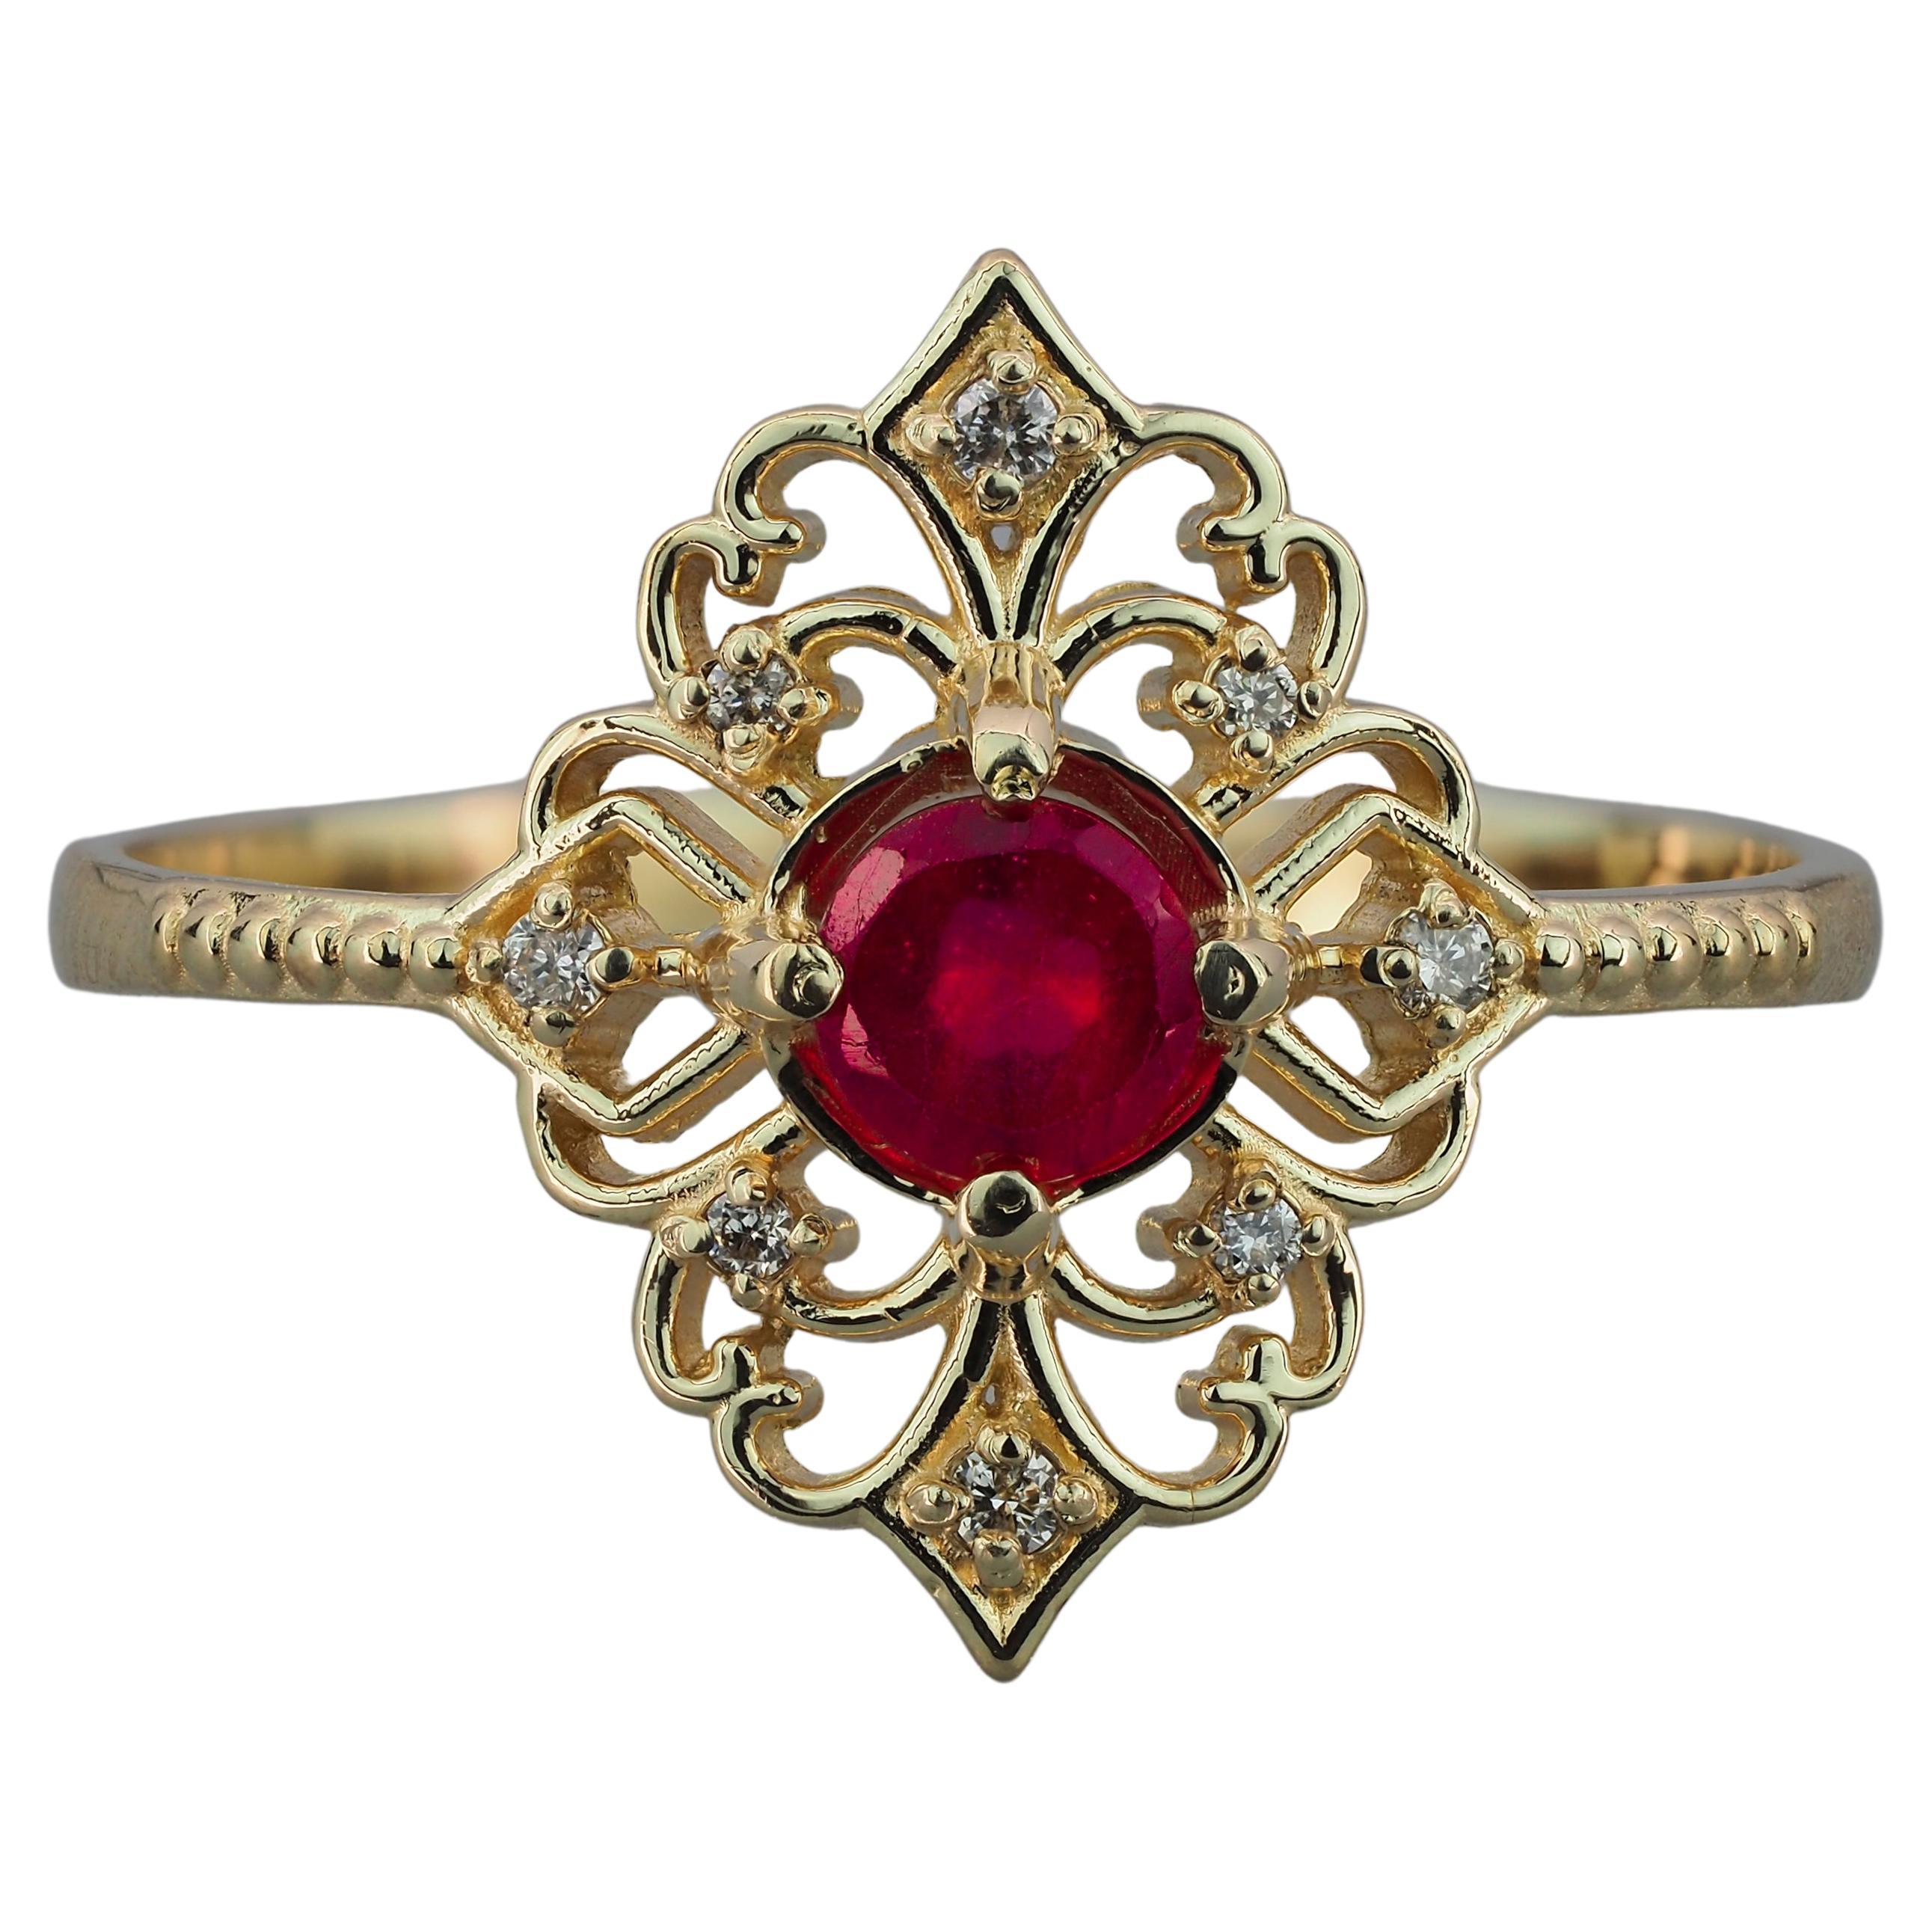 14 Karat Gold Ring with Ruby and Diamonds, Vintage Style Ruby Ring